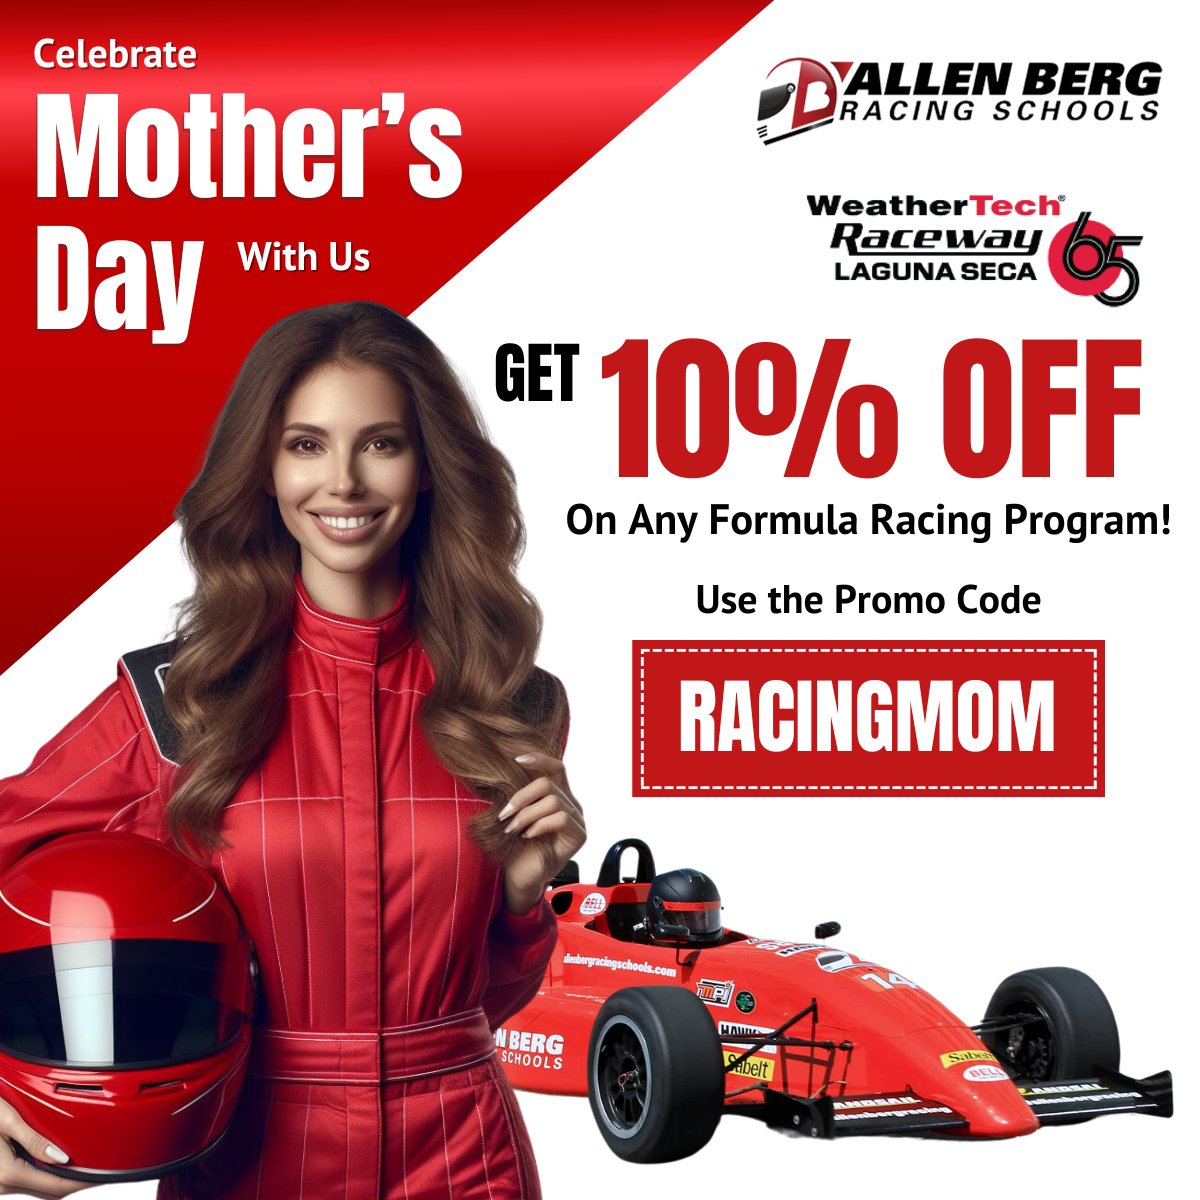 🎉 Give Mom the gift of speed this Mother's Day! Enjoy 10% off our Formula Racing programs until May 12th. Use code RACINGMOM and make her day unforgettable! #MothersDay #RacingFun 🏁🚗 allenbergracingschools.com